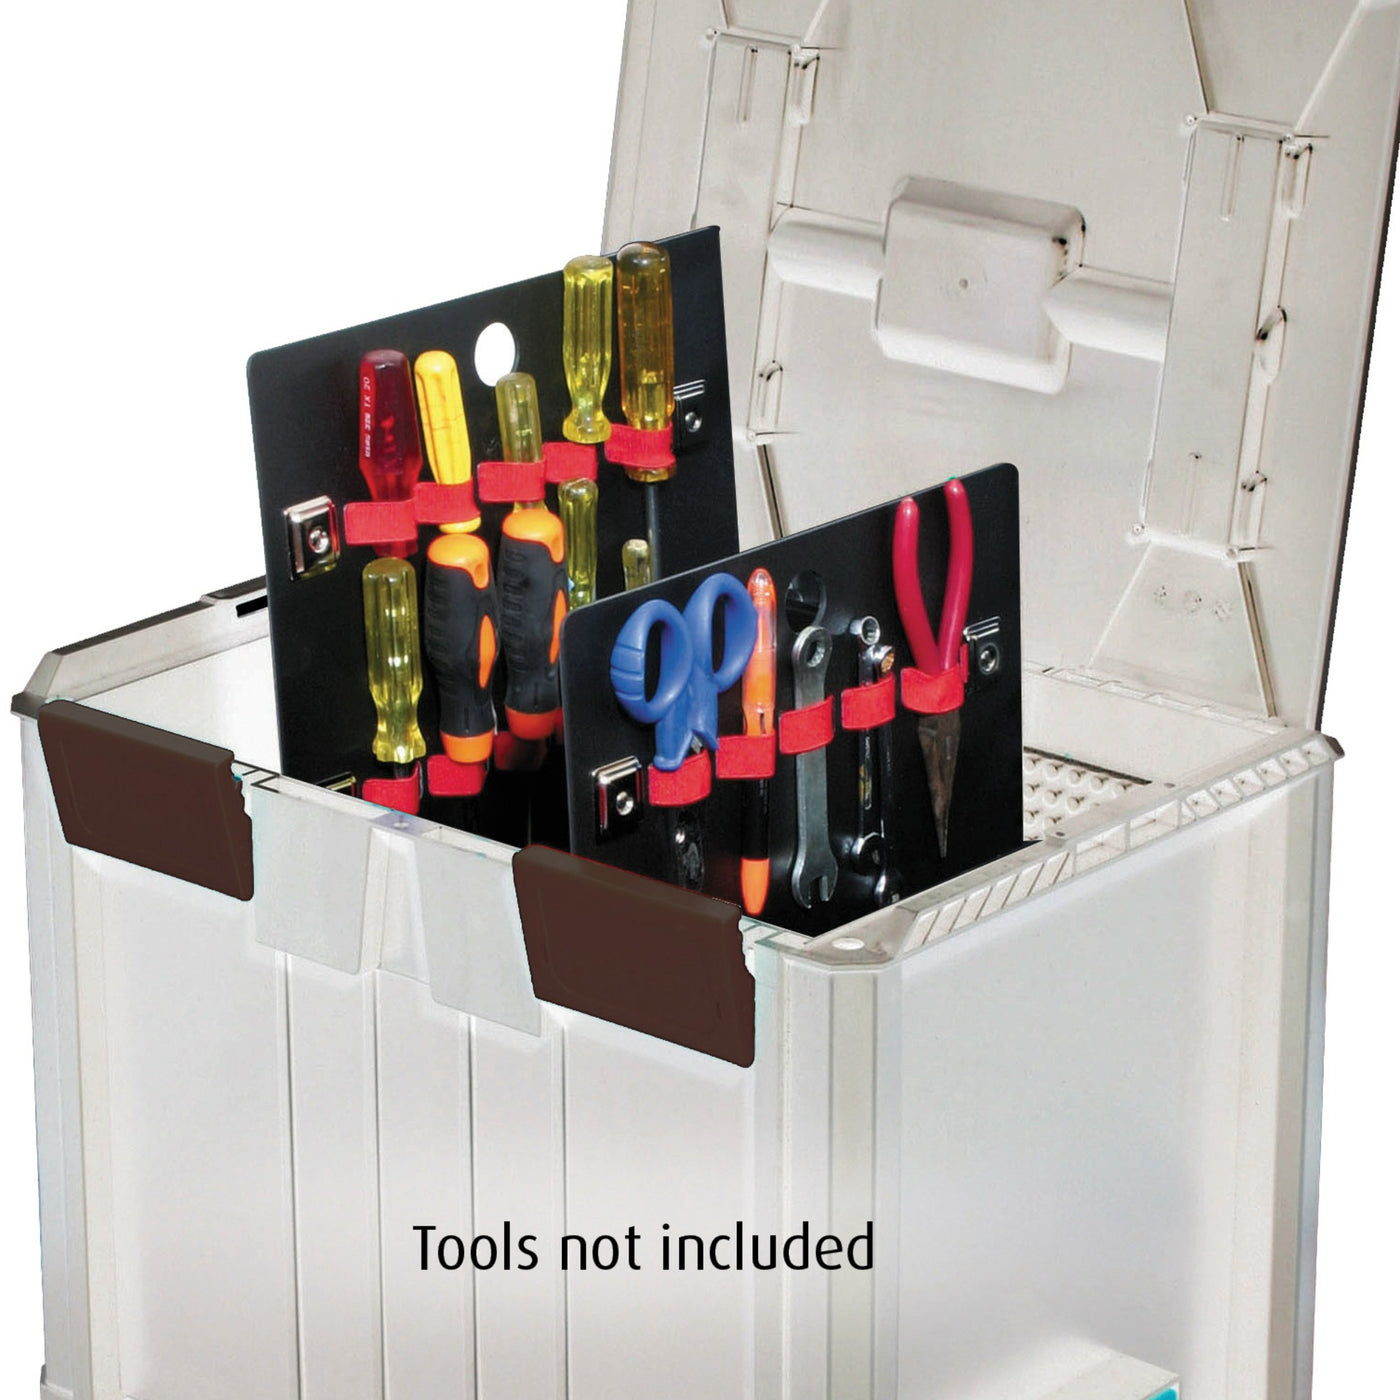 P22 – SSC3 Tool Panel Kit (2 x side foams and 2 x P2 tool panels)